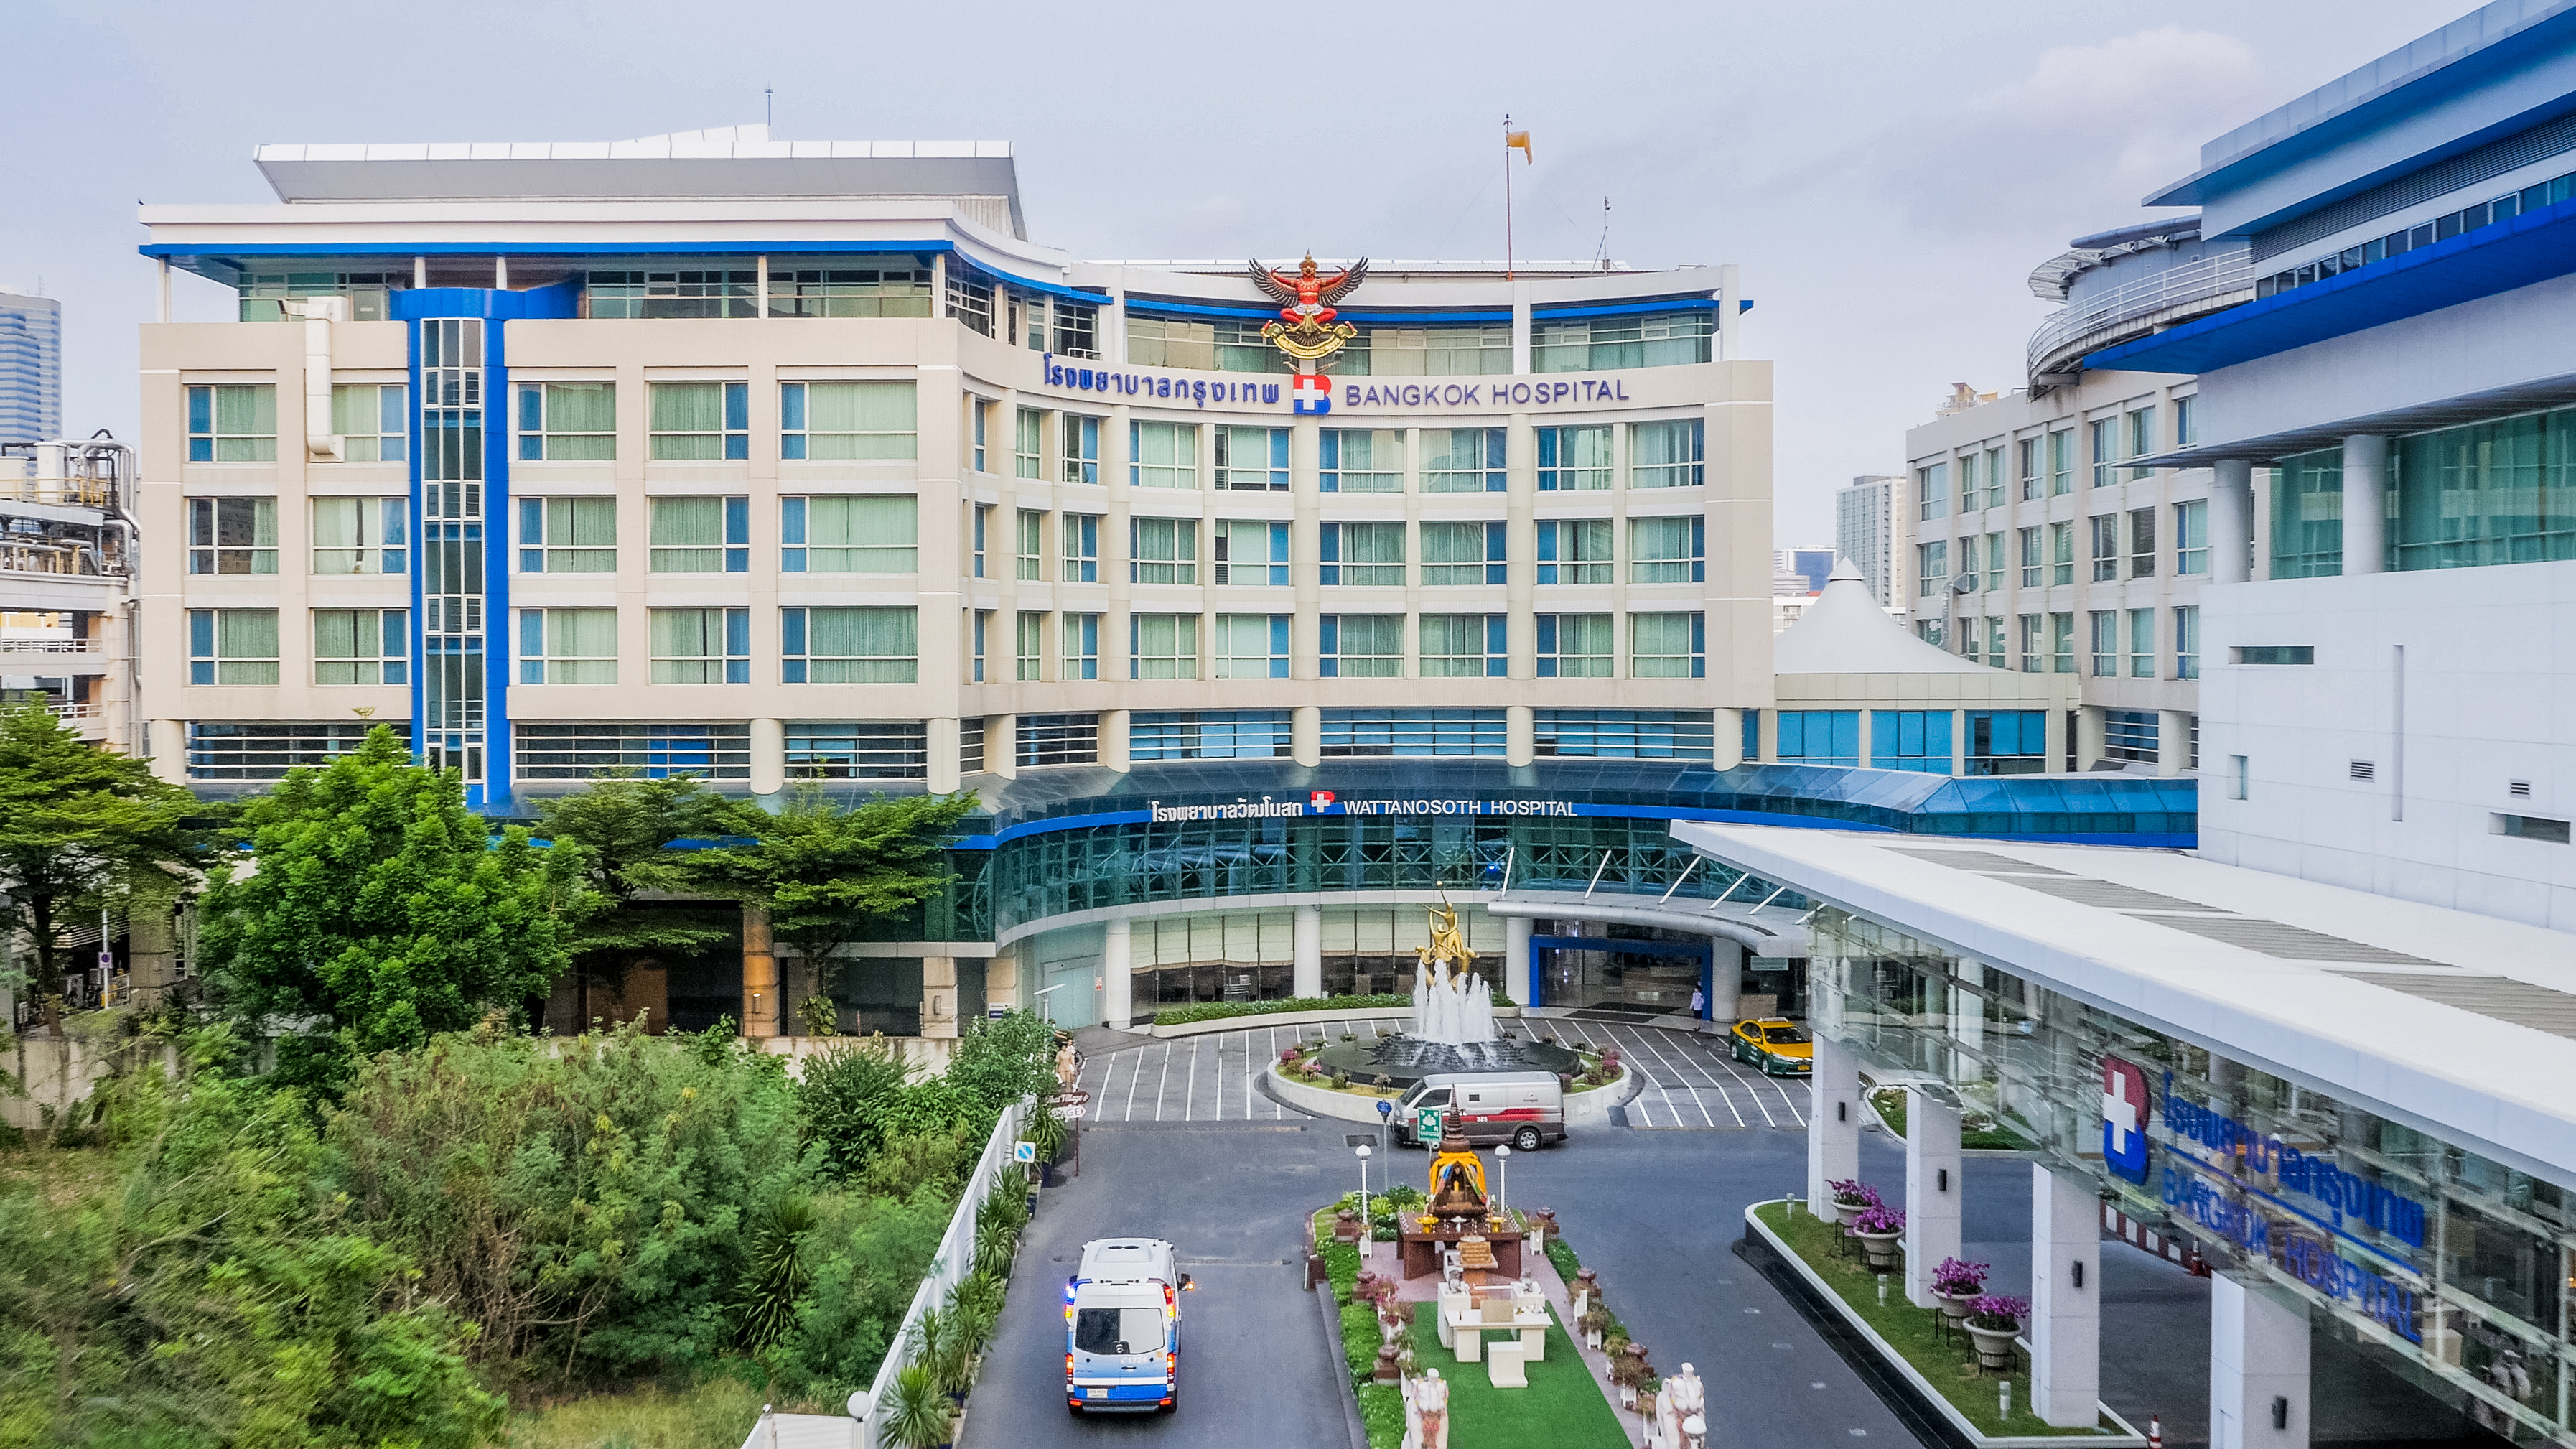 The most technologically advanced private hospital in Thailand